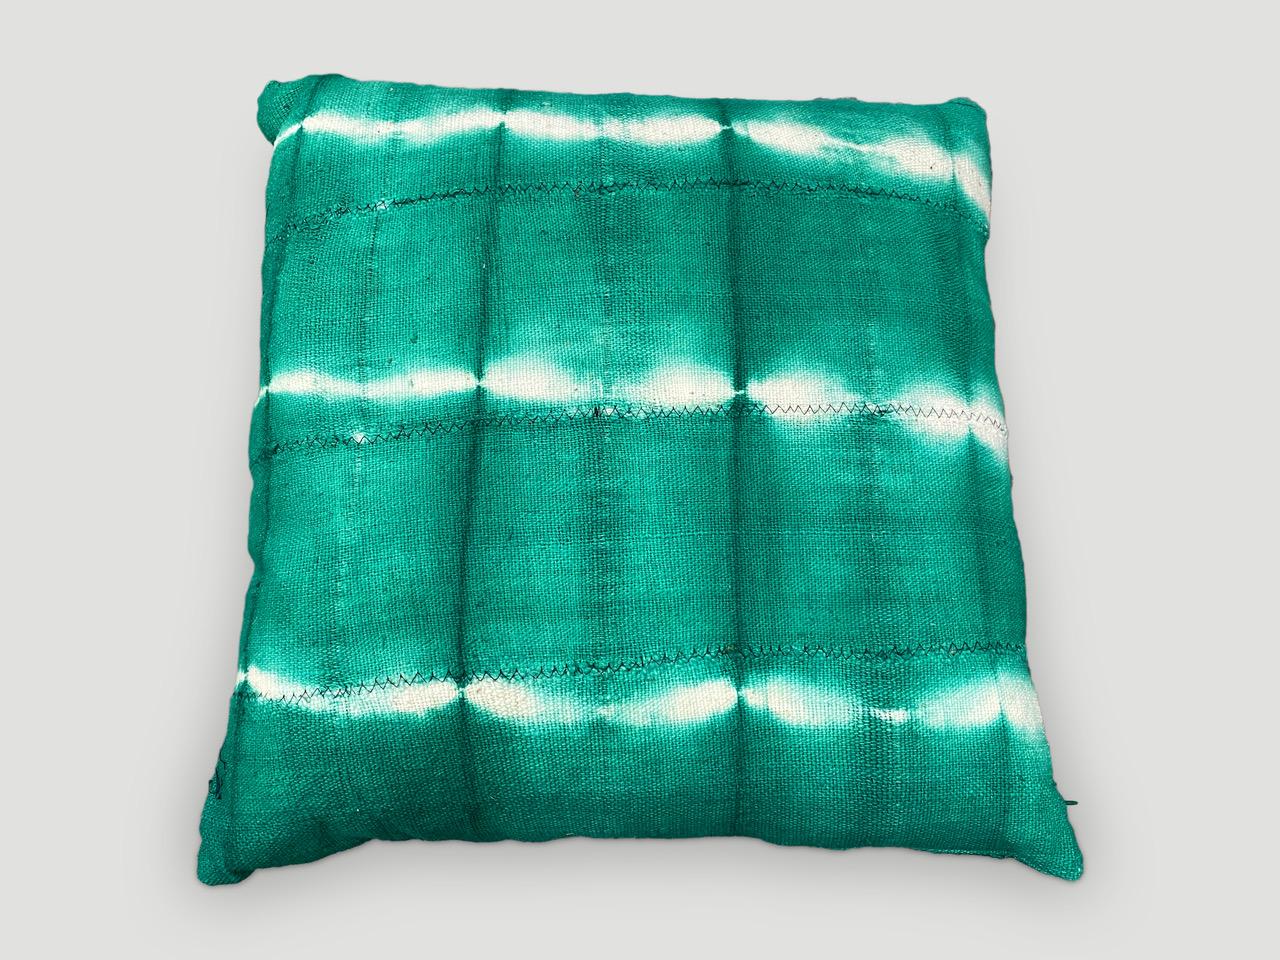 Green over-dyed mud cloth Mali textile from West Africa, made into a pillow. Double backed with concealed zipper. Insert included. We have a collection. The price reflects the one shown.

Andrianna Shamaris. The Leader In Modern Organic Design.